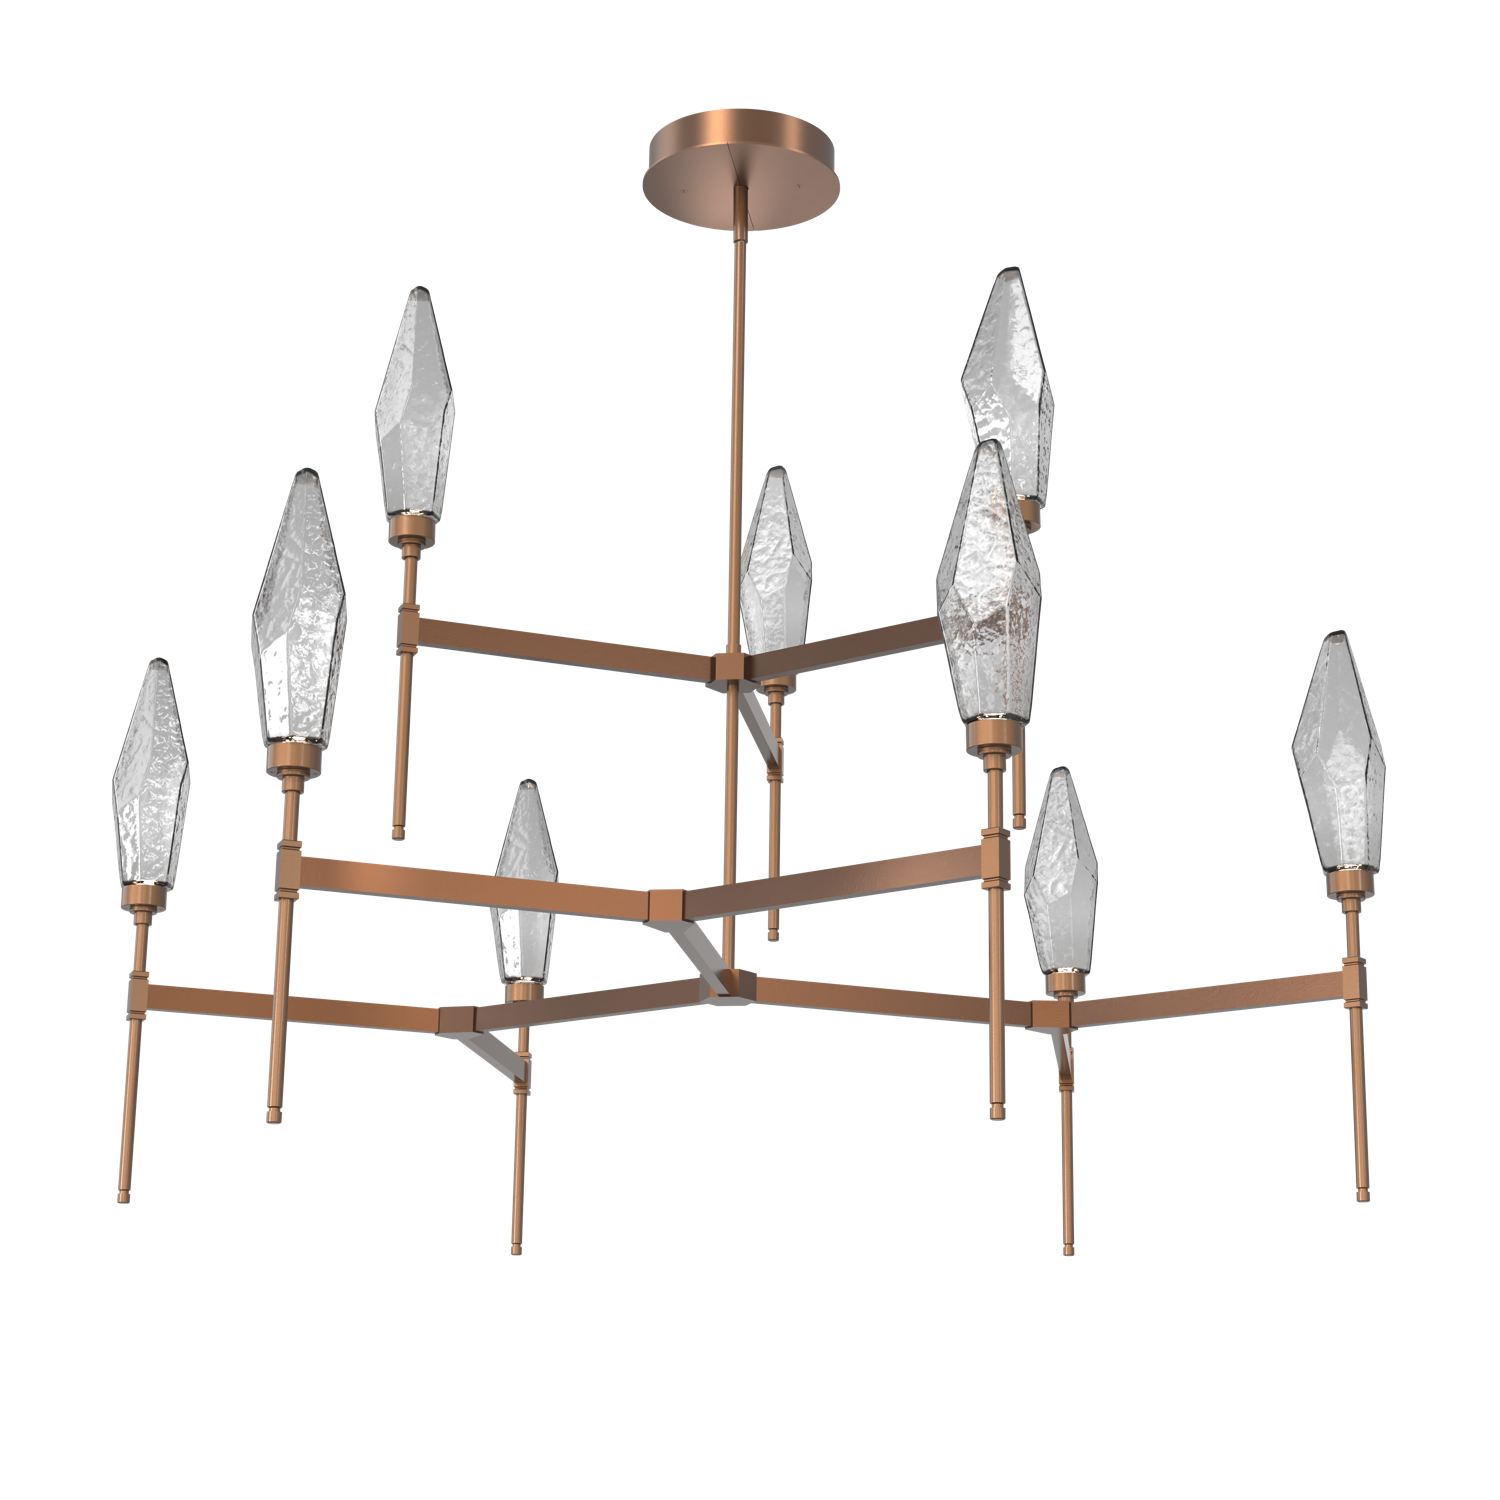 CHB0050-54-BB-CS-Hammerton-Studio-Rock-Crystal-54-inch-round-two-tier-belvedere-chandelier-with-burnished-bronze-finish-and-chilled-smoke-glass-shades-and-LED-lamping